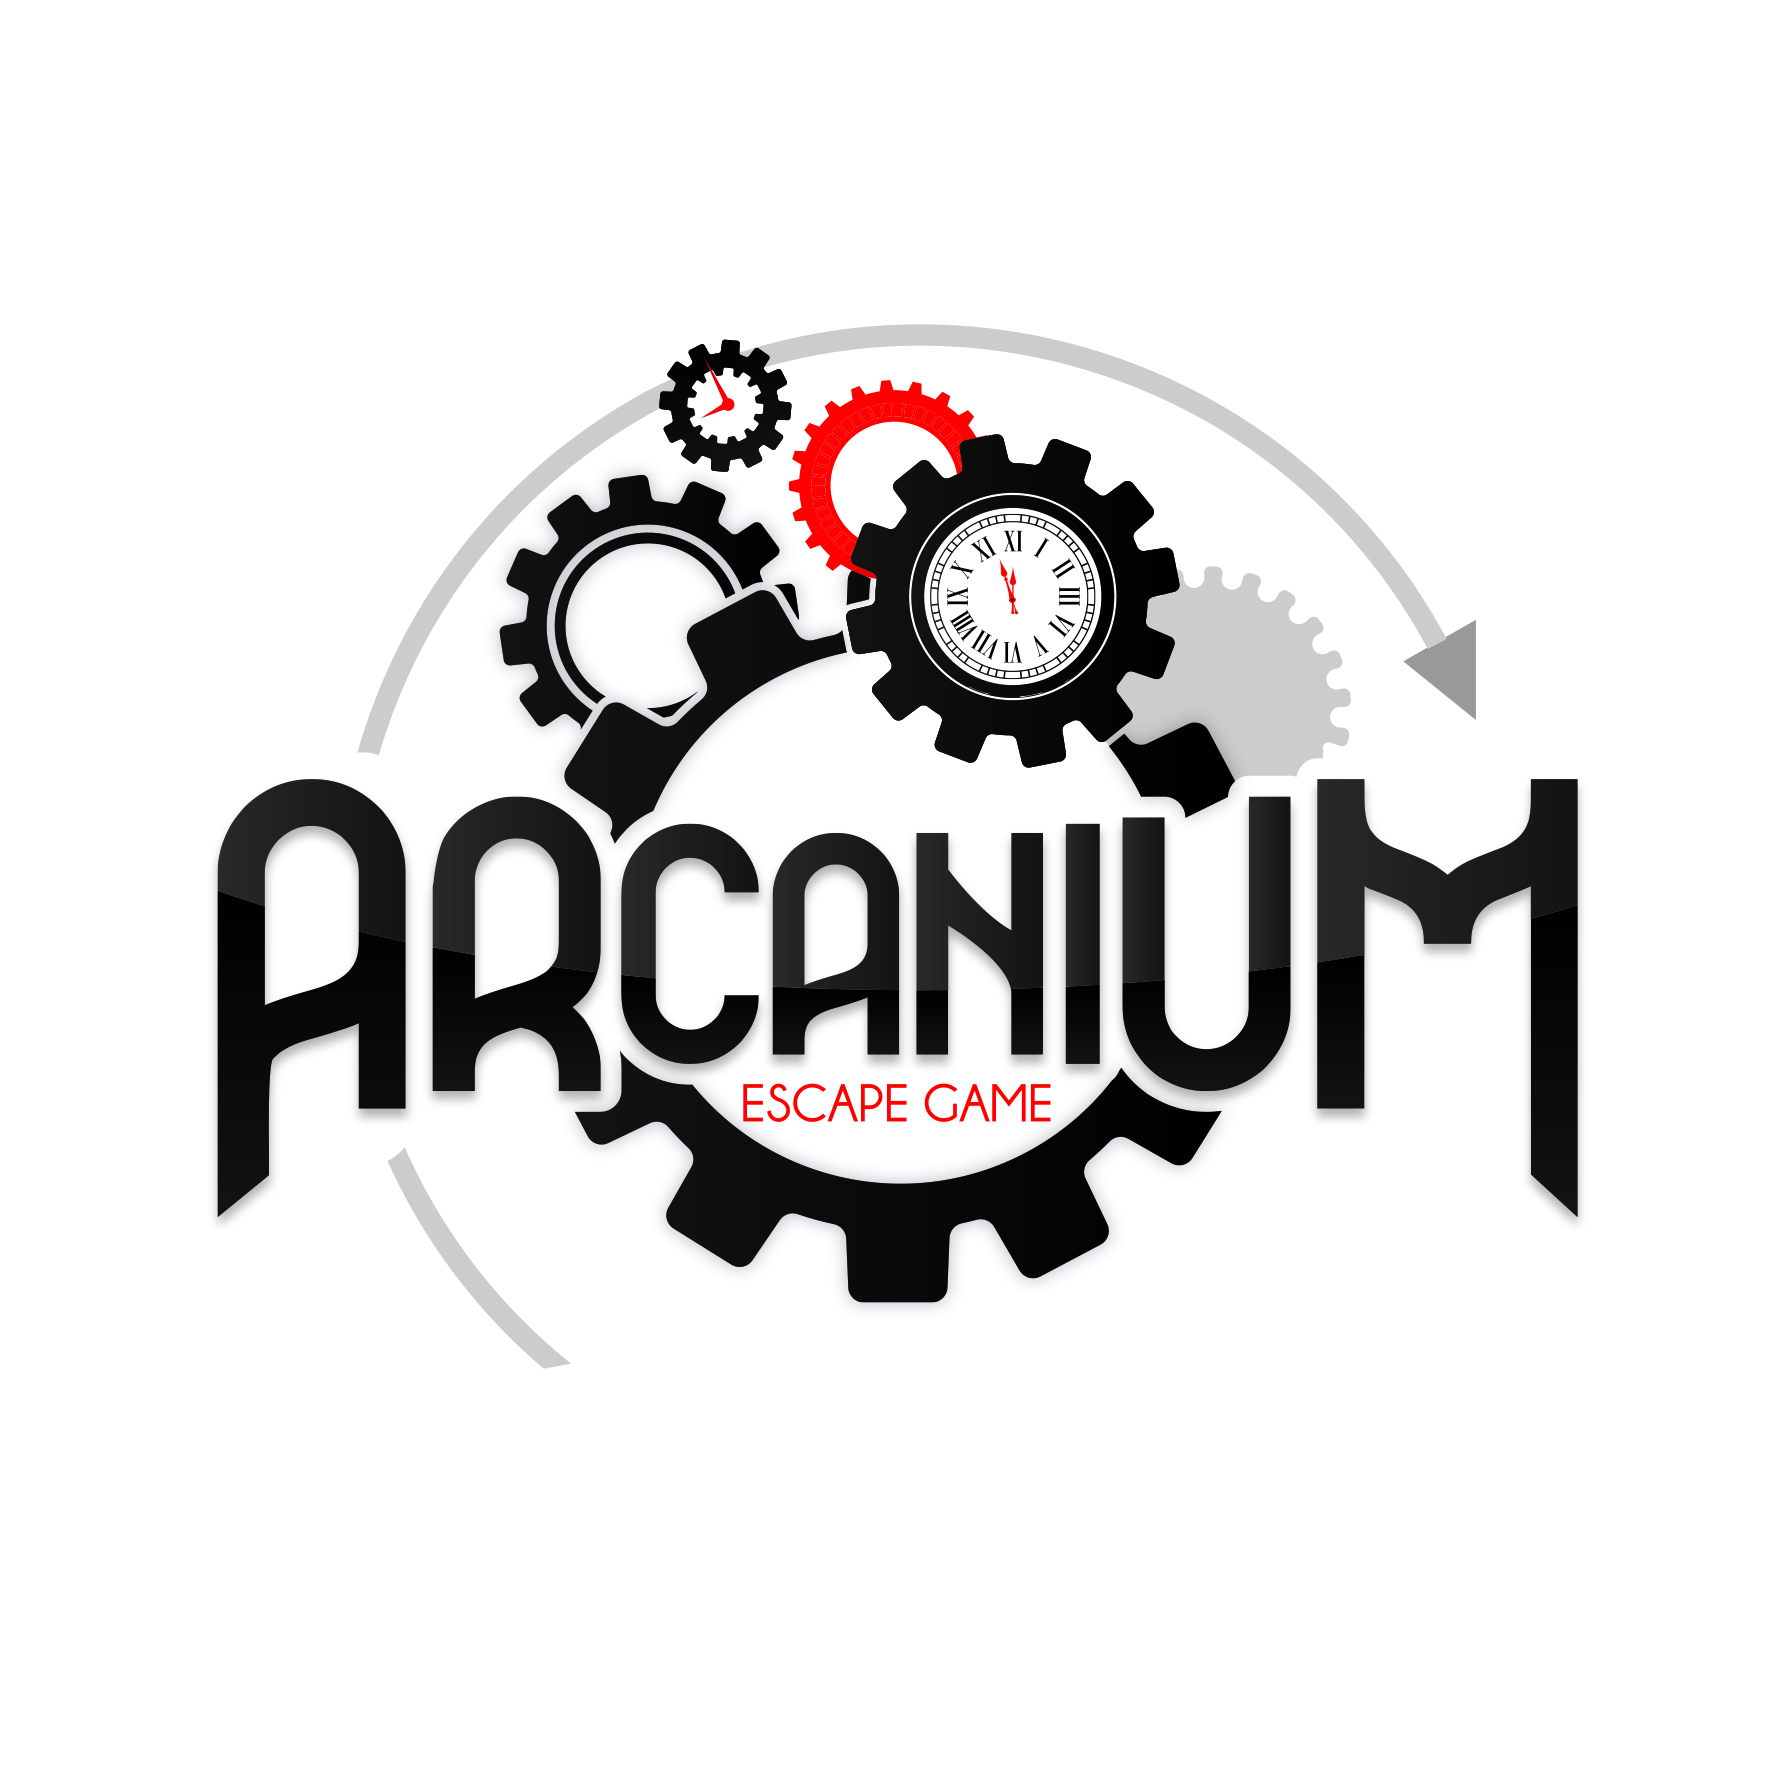 Arcanium download the new for apple